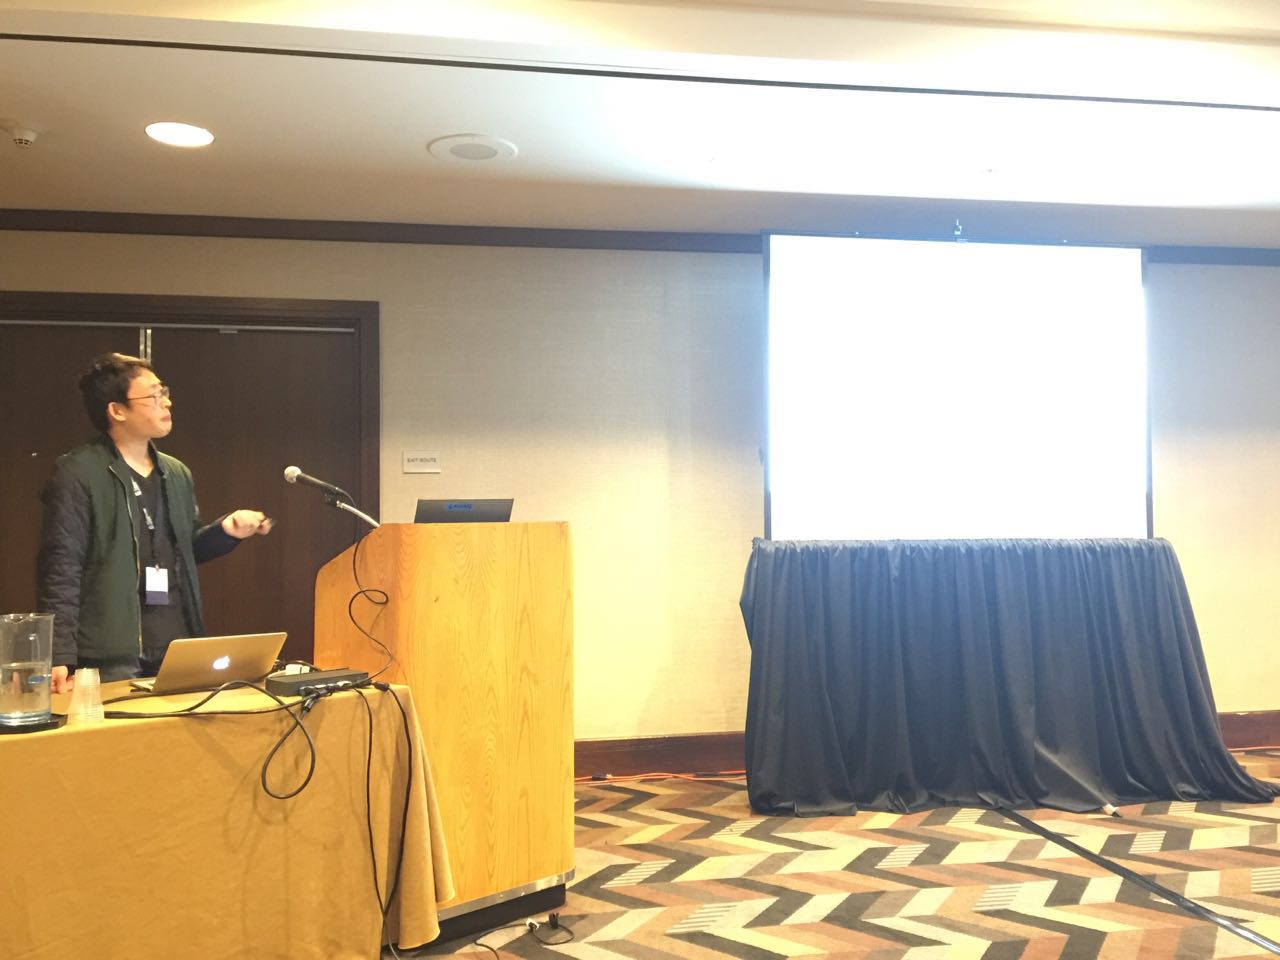 Changhua delivered his talk on Wily at INFOCOM 2016 in San Francisco